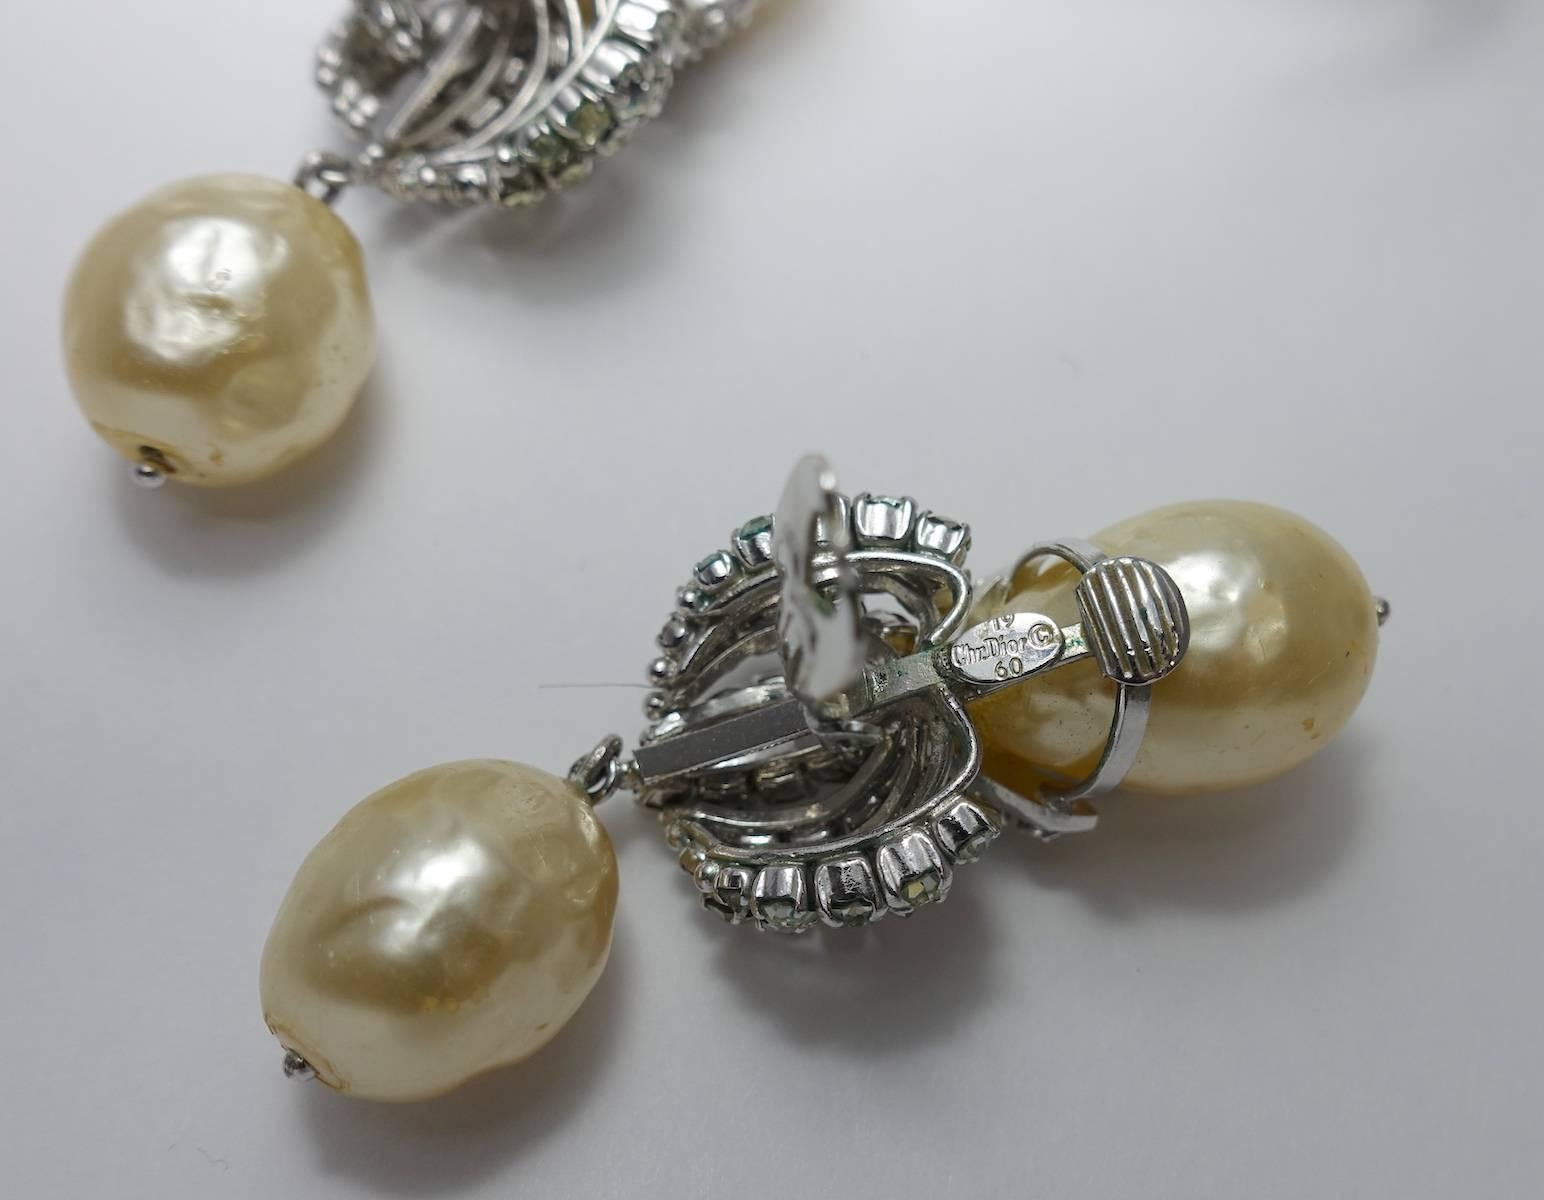 This is a rare, 1960s vintage signed Christian Dior brooch & earrings featuring faux pearls with crystals in a rhodium silver tone setting.  The brooch measures 3-3/8” x 2-3/8” with a turn closure. The matching clip earrings are 2-5/8” x 7/8”.